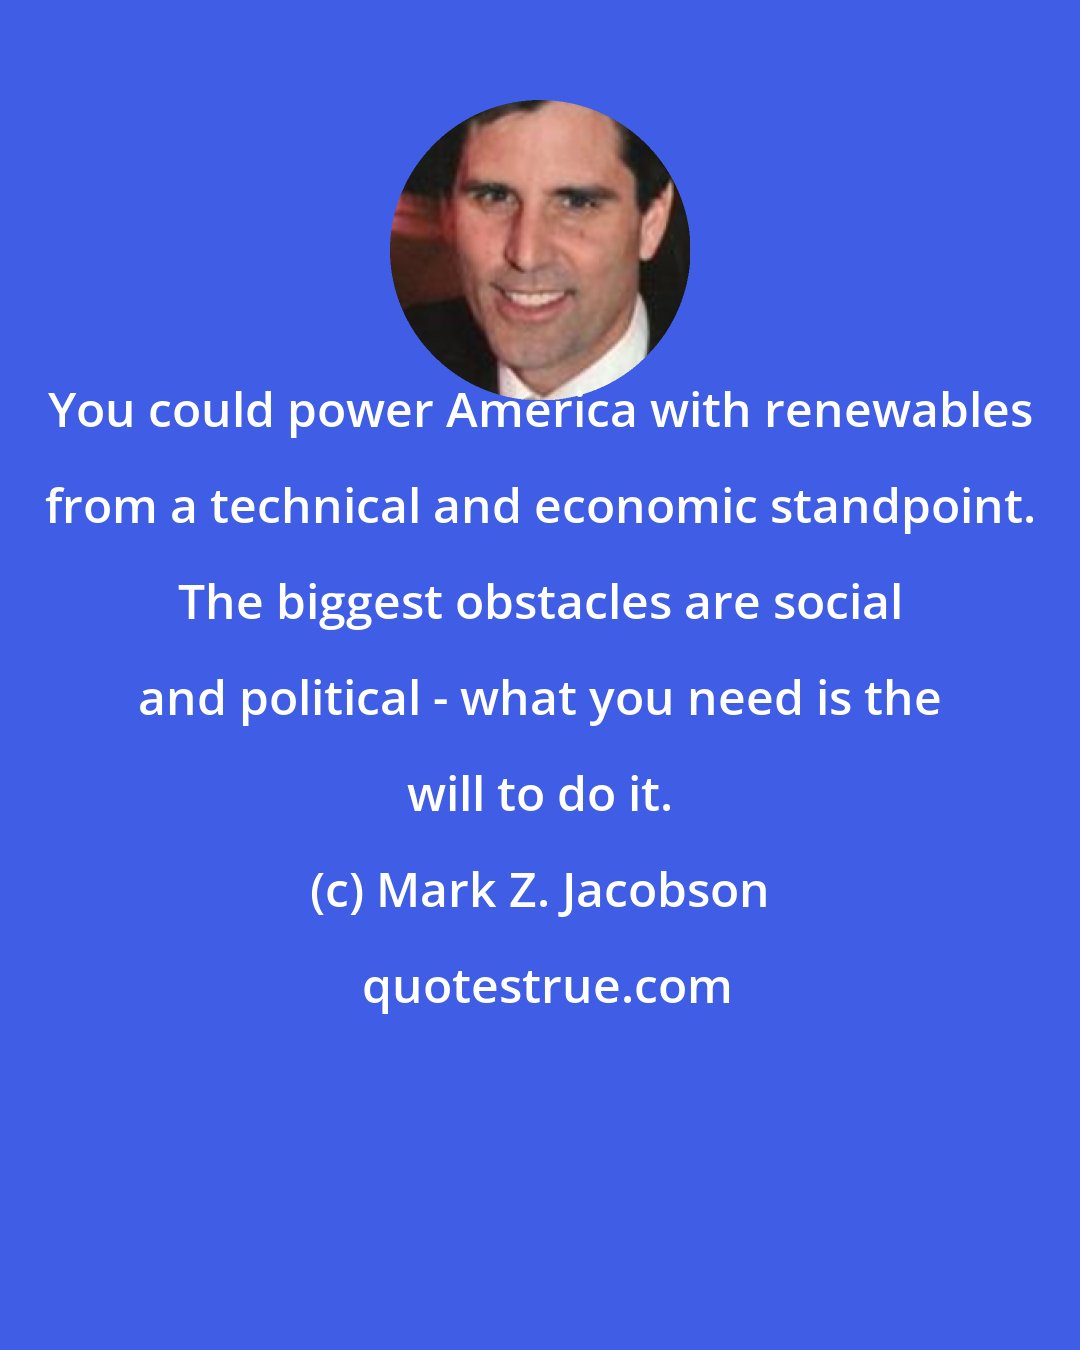 Mark Z. Jacobson: You could power America with renewables from a technical and economic standpoint. The biggest obstacles are social and political - what you need is the will to do it.